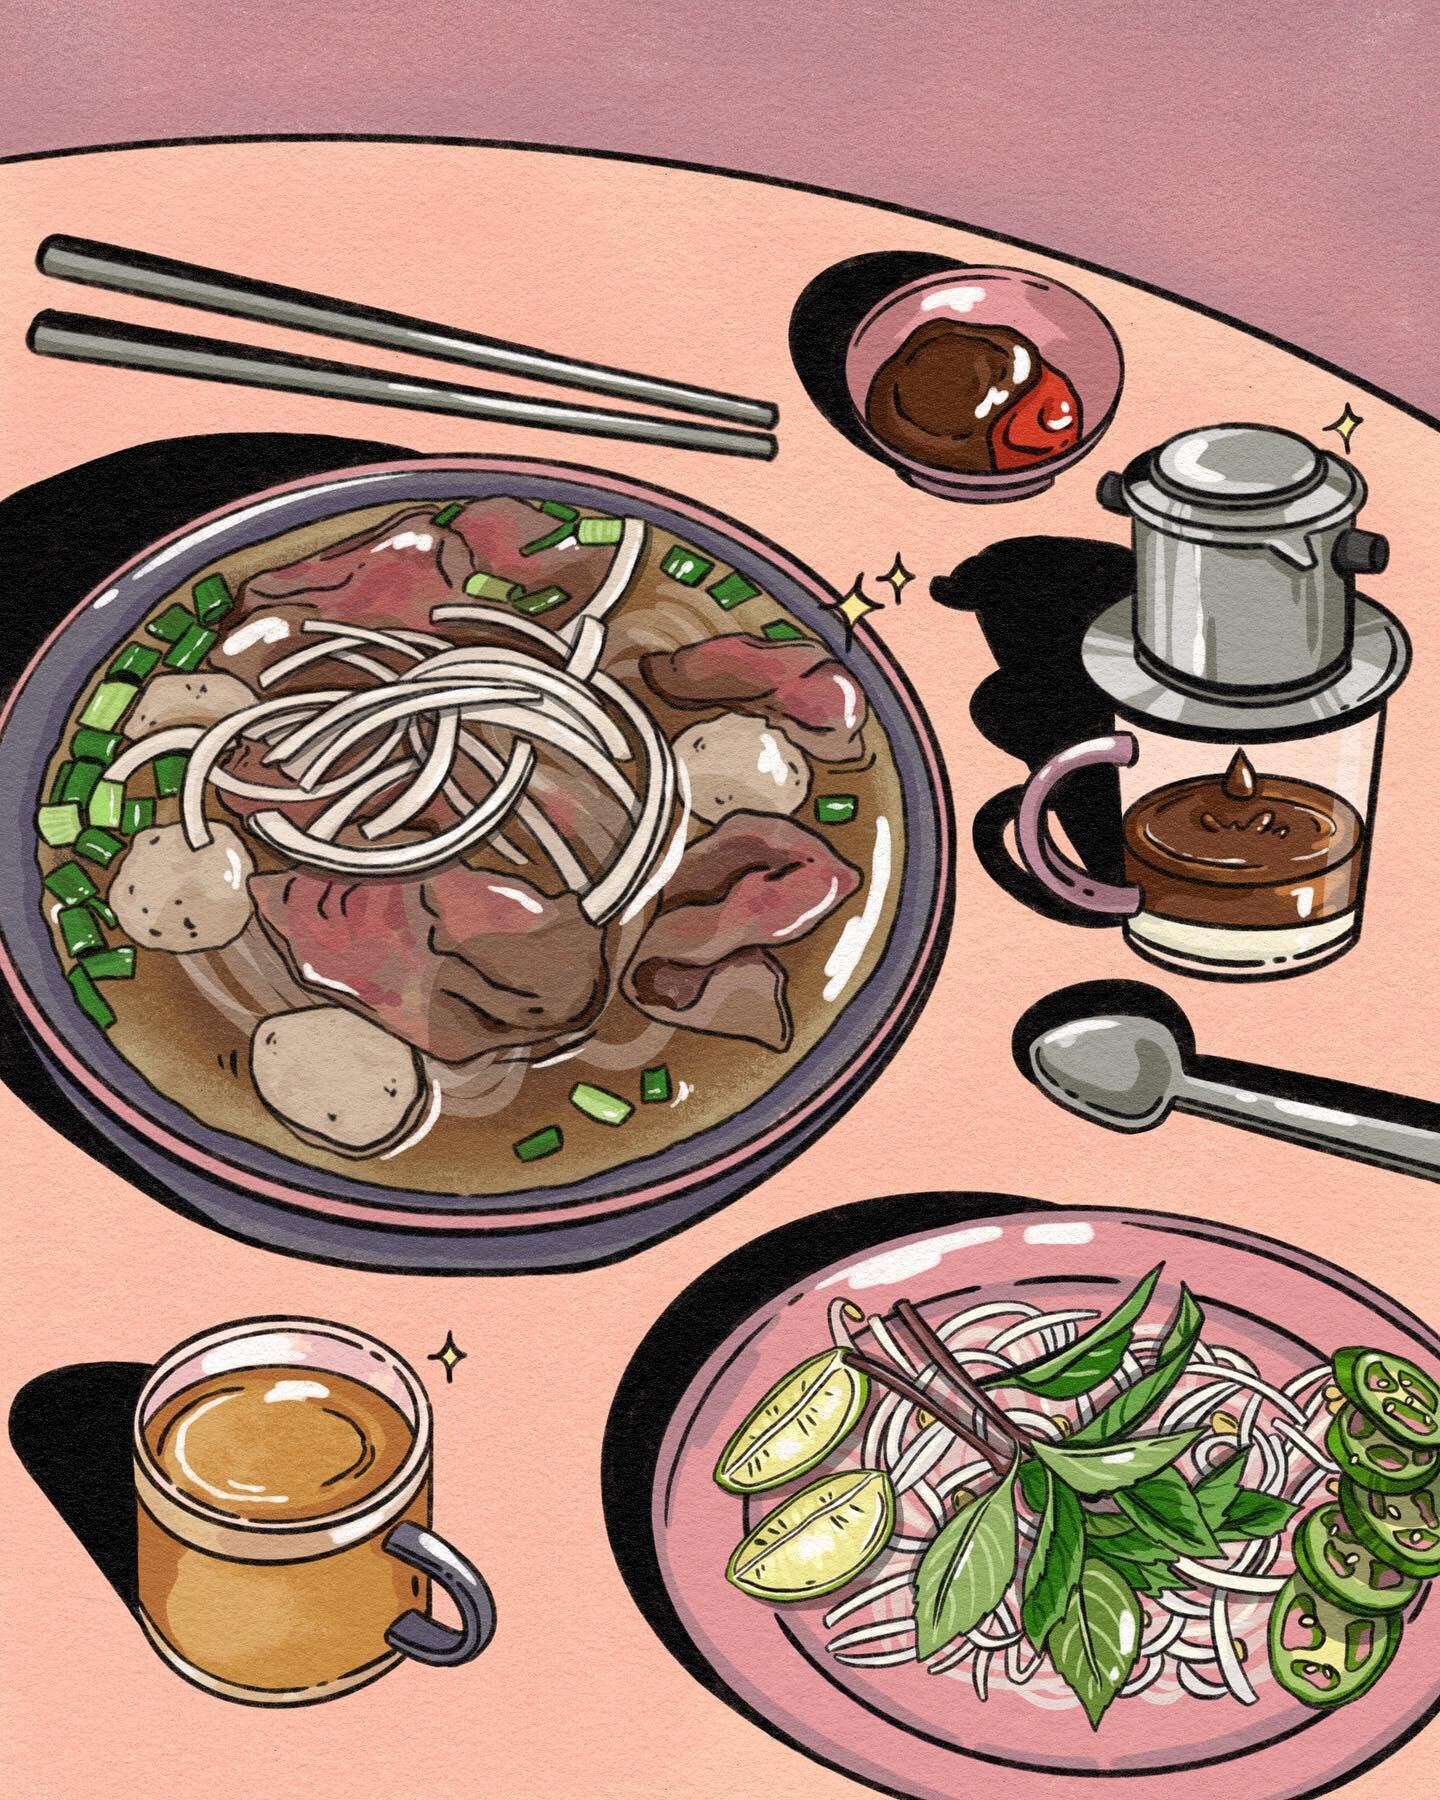 There is nothing quite like eating a hot bowl of pho on a rainy day 🌧️ When paired with Vietnamese coffee, I think it makes the perfect comfort meal!

This illustration was so fun to create and is coming back in greeting card form as one of my my PH